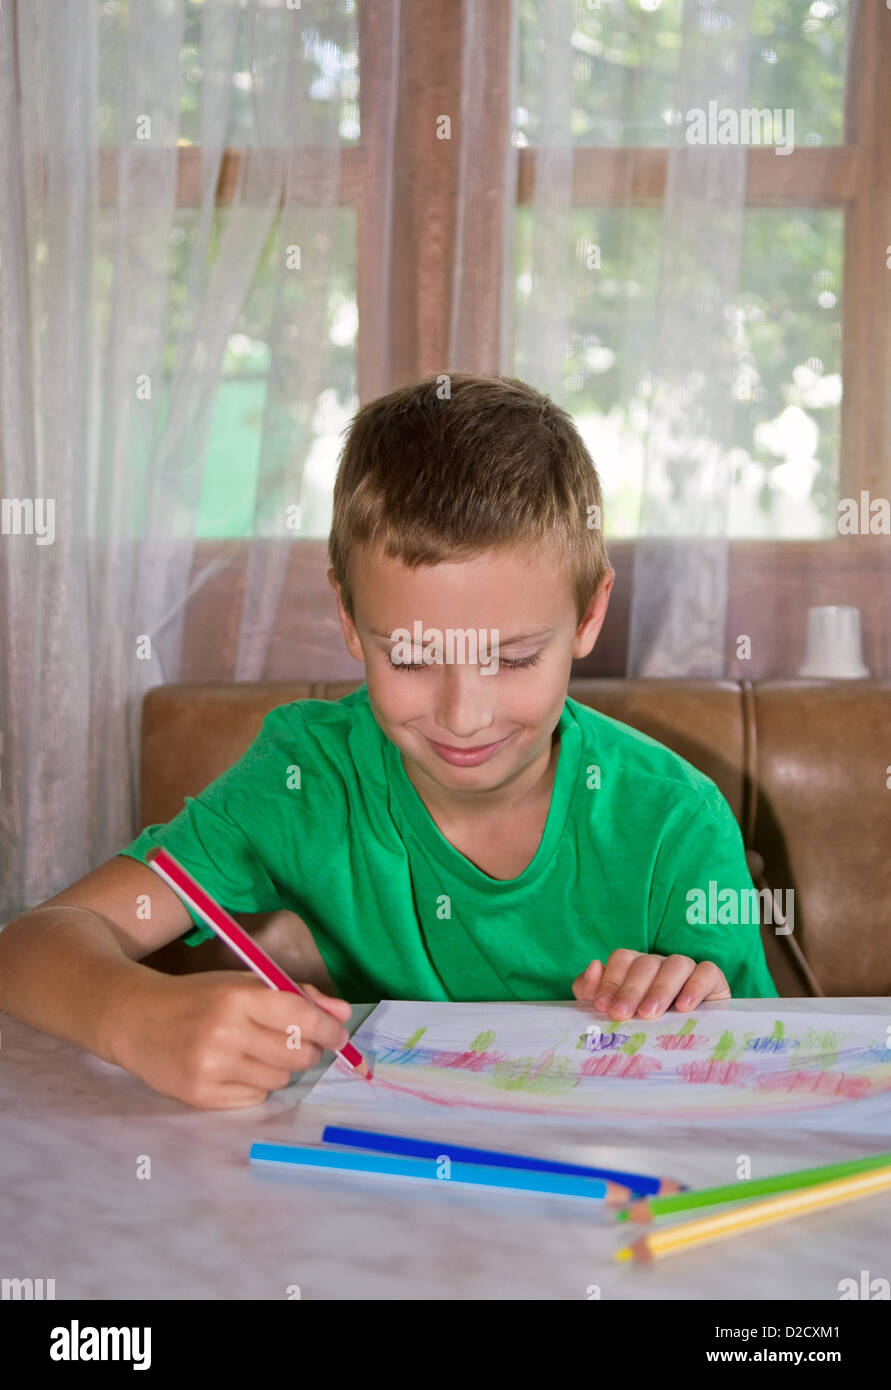 Young smiling boy drawing image positive de crayons Banque D'Images